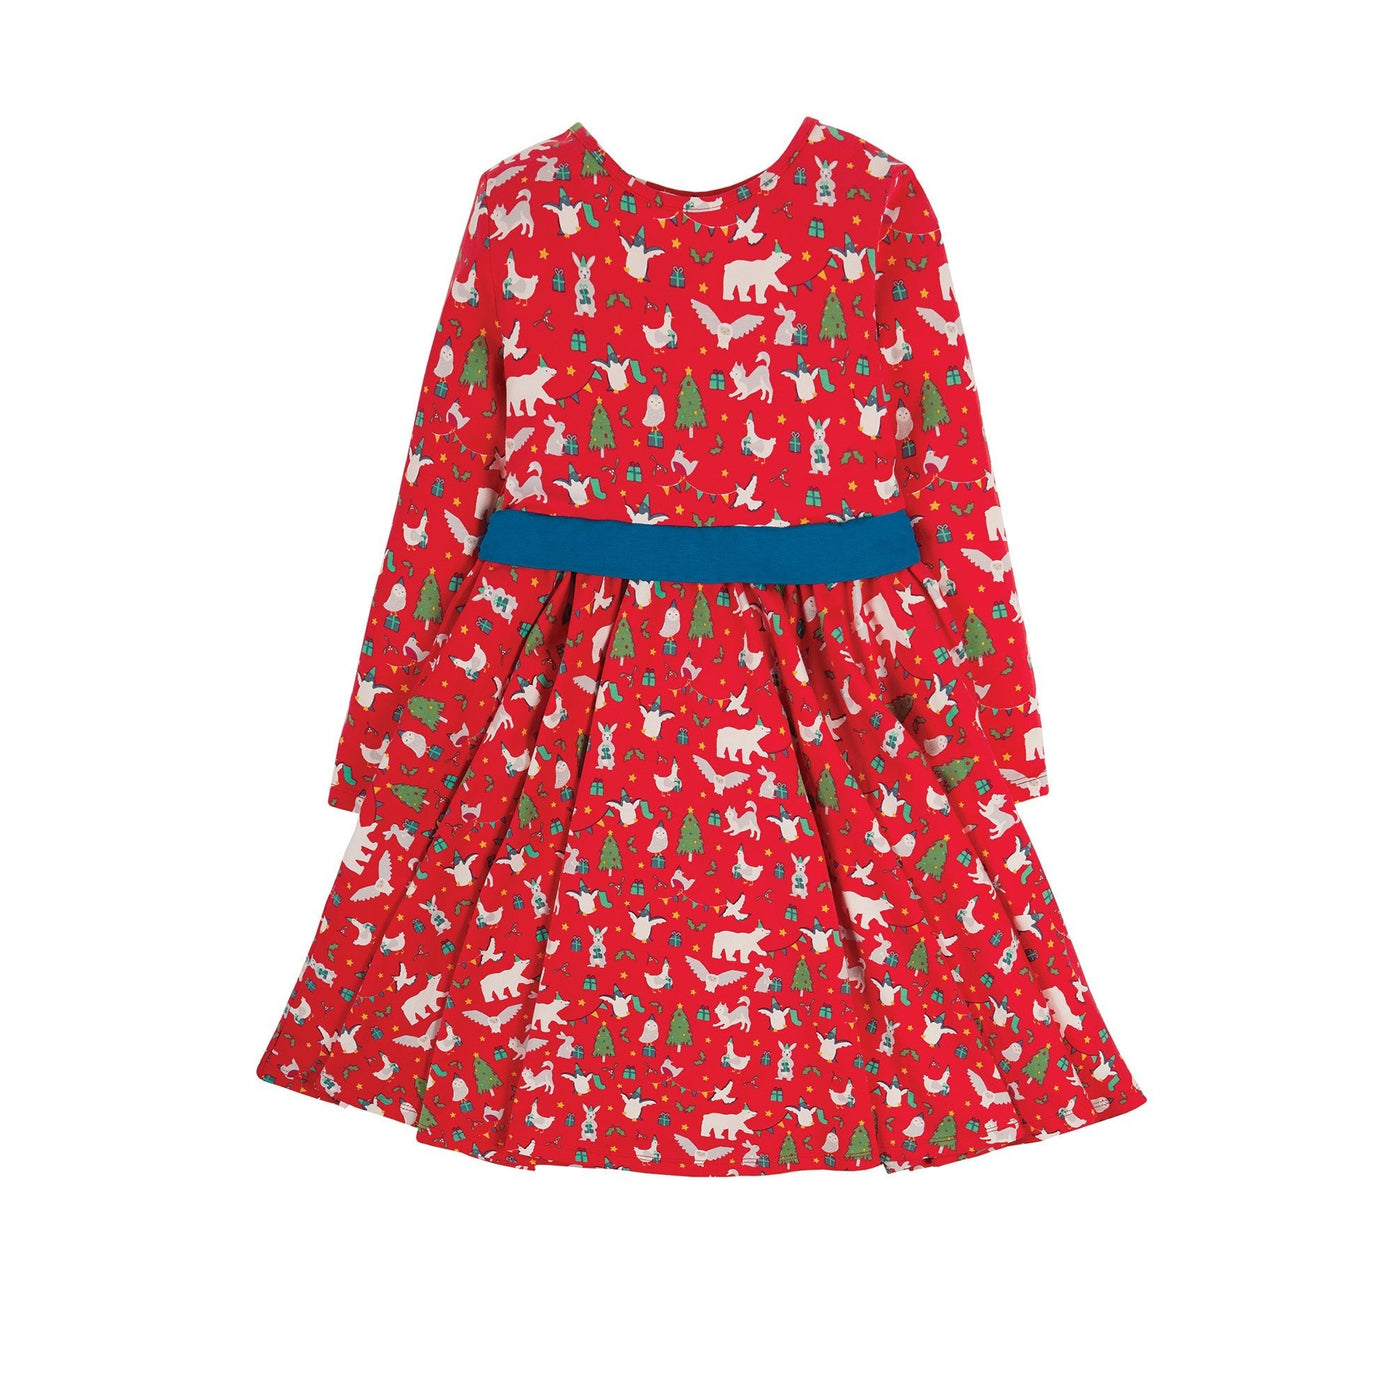 Party Skater Dress - Lets Party by Frugi